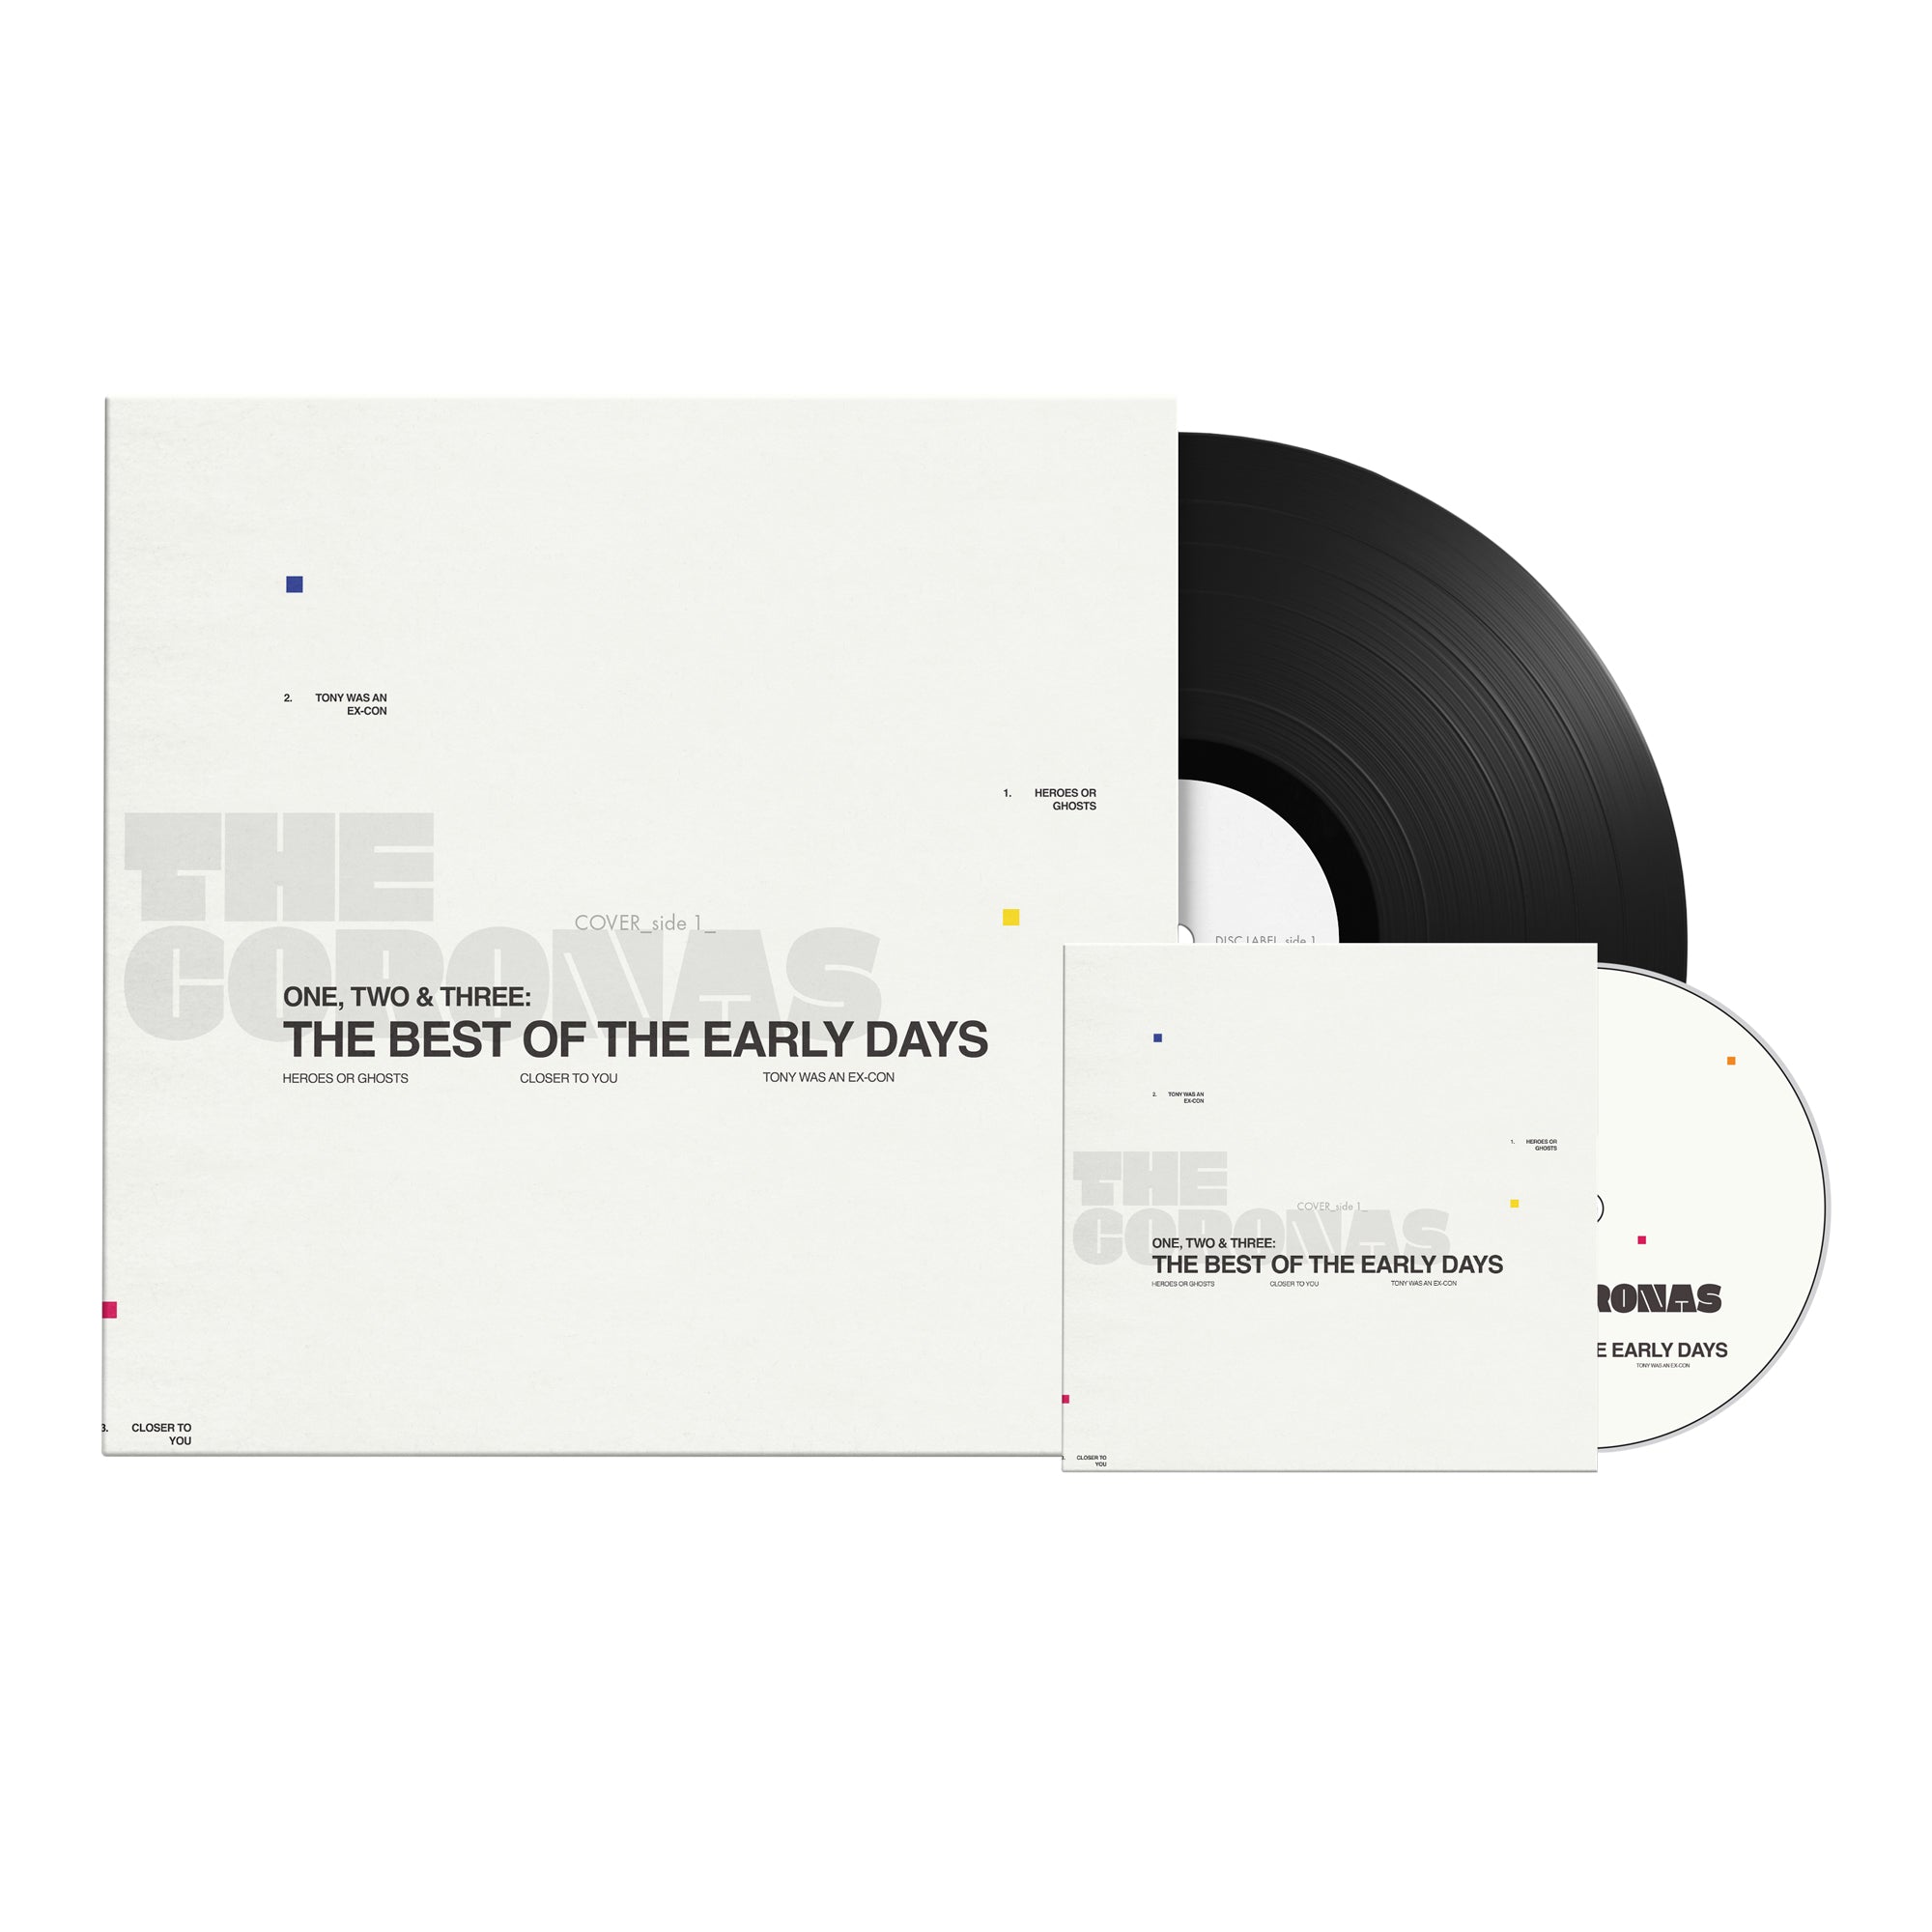 One, Two & Three: The Best Of The Early Days [CD & Vinyl Bundle]